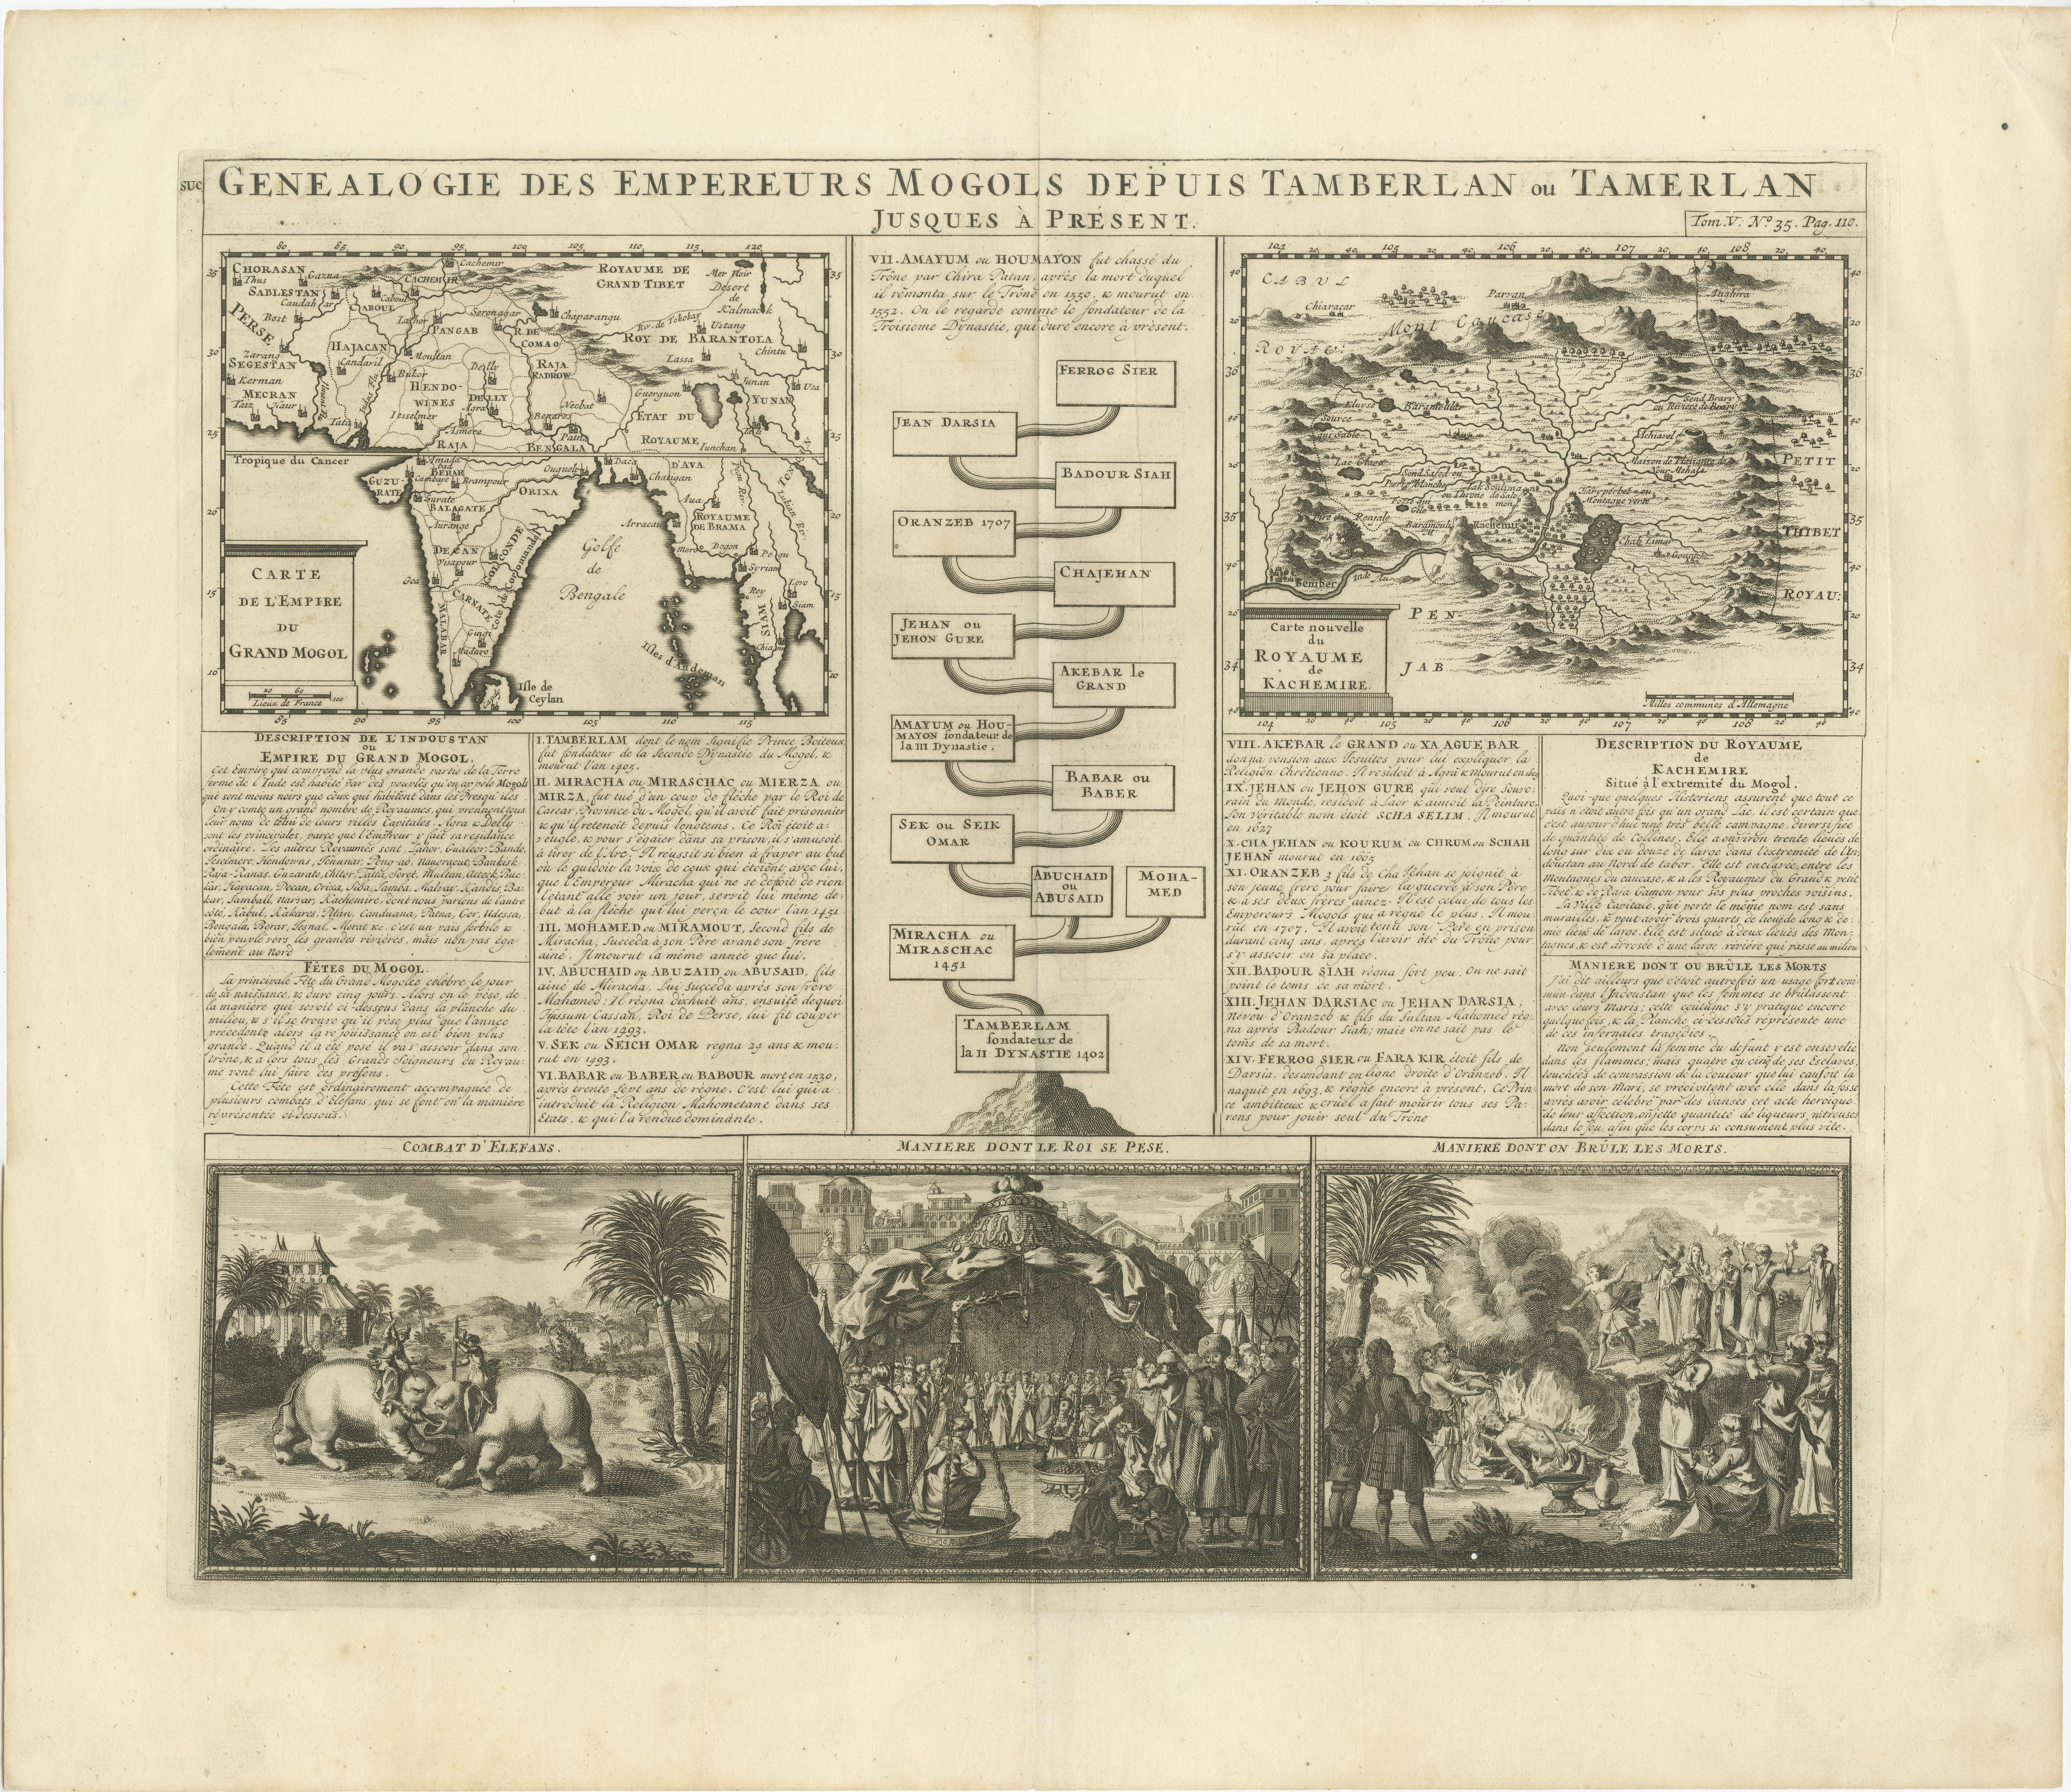 Antique map titled 'Genealogie des Empereurs Mogols depuis Tamberlan ou Tamerlan'. Two maps, a genealogical tree and three indigenous views of the Mogol Empire on one sheet with descriptive text. The upper maps show the Empire of the Great Mogol and